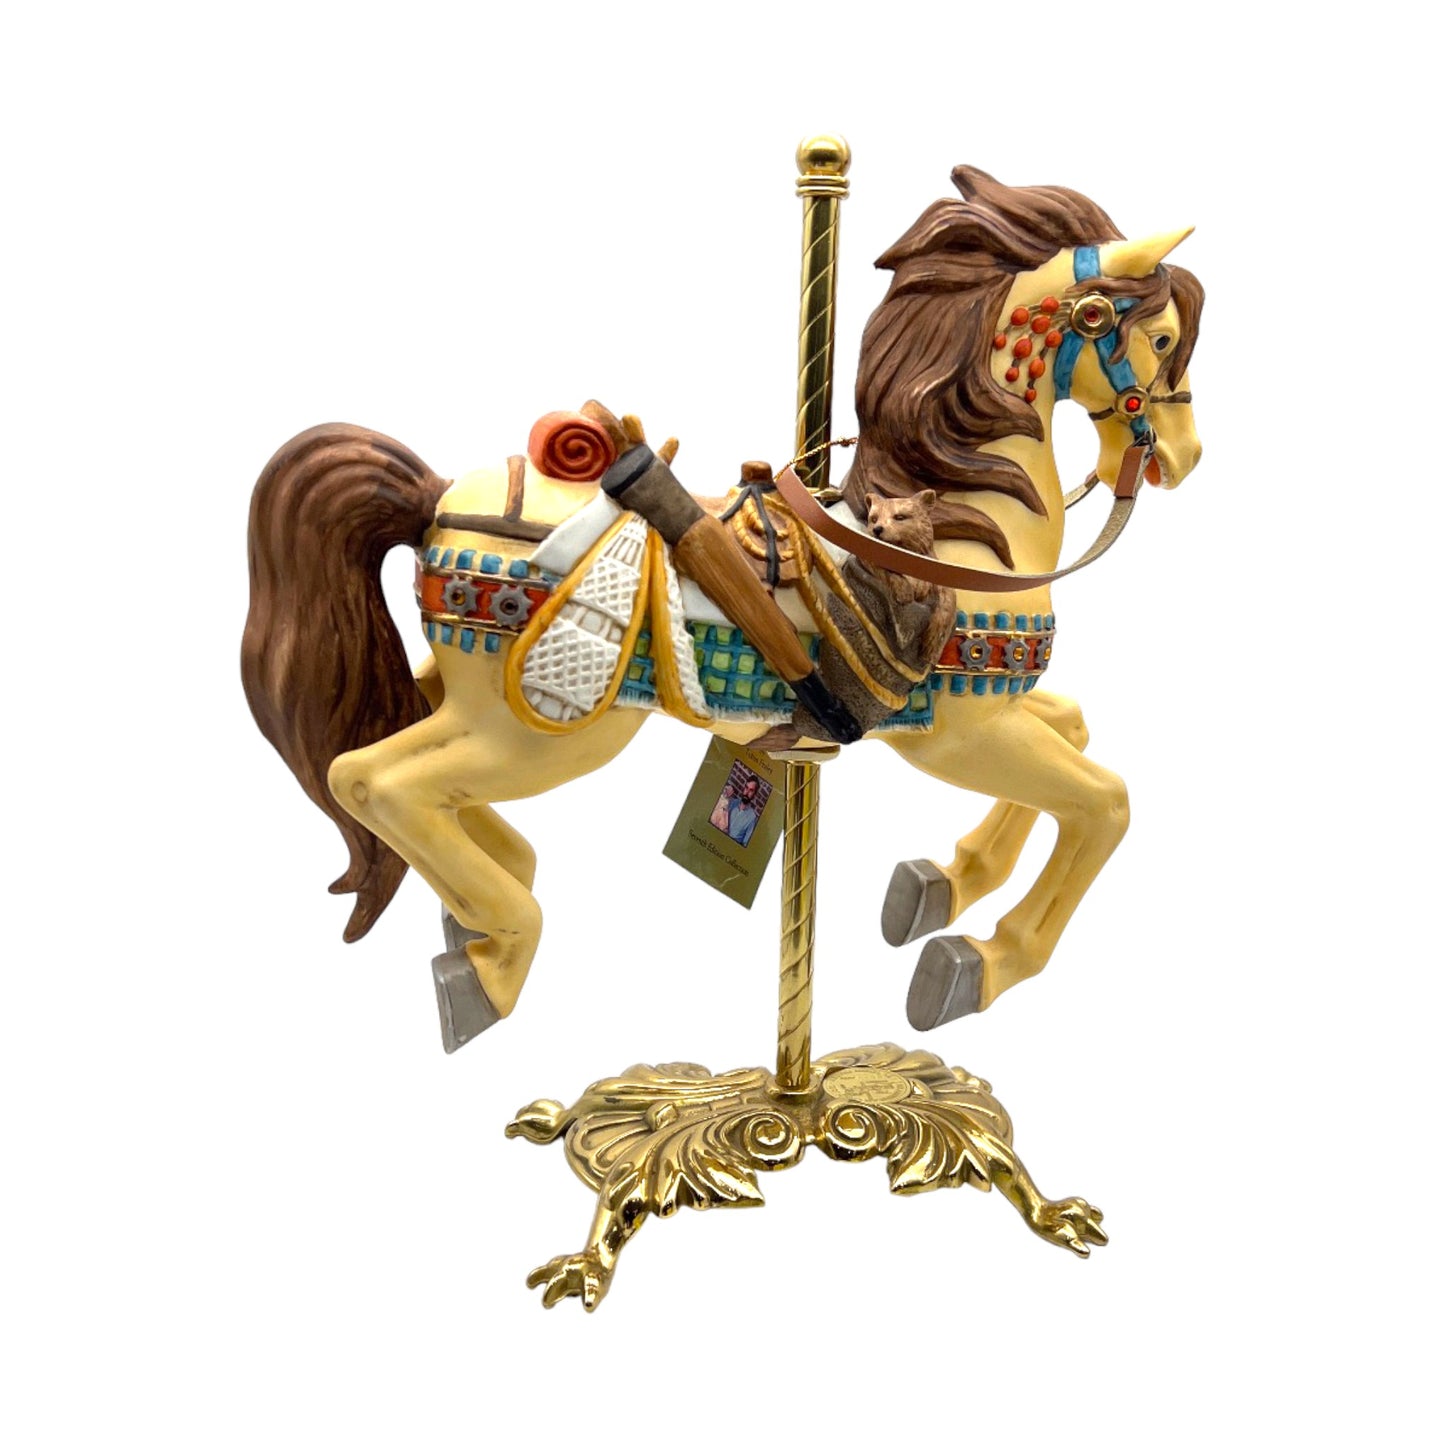 Tobin Fraley Carousel - 7th Edition - Pathfinder - #0541 Of 2500 - Signed - 1993 - 13"